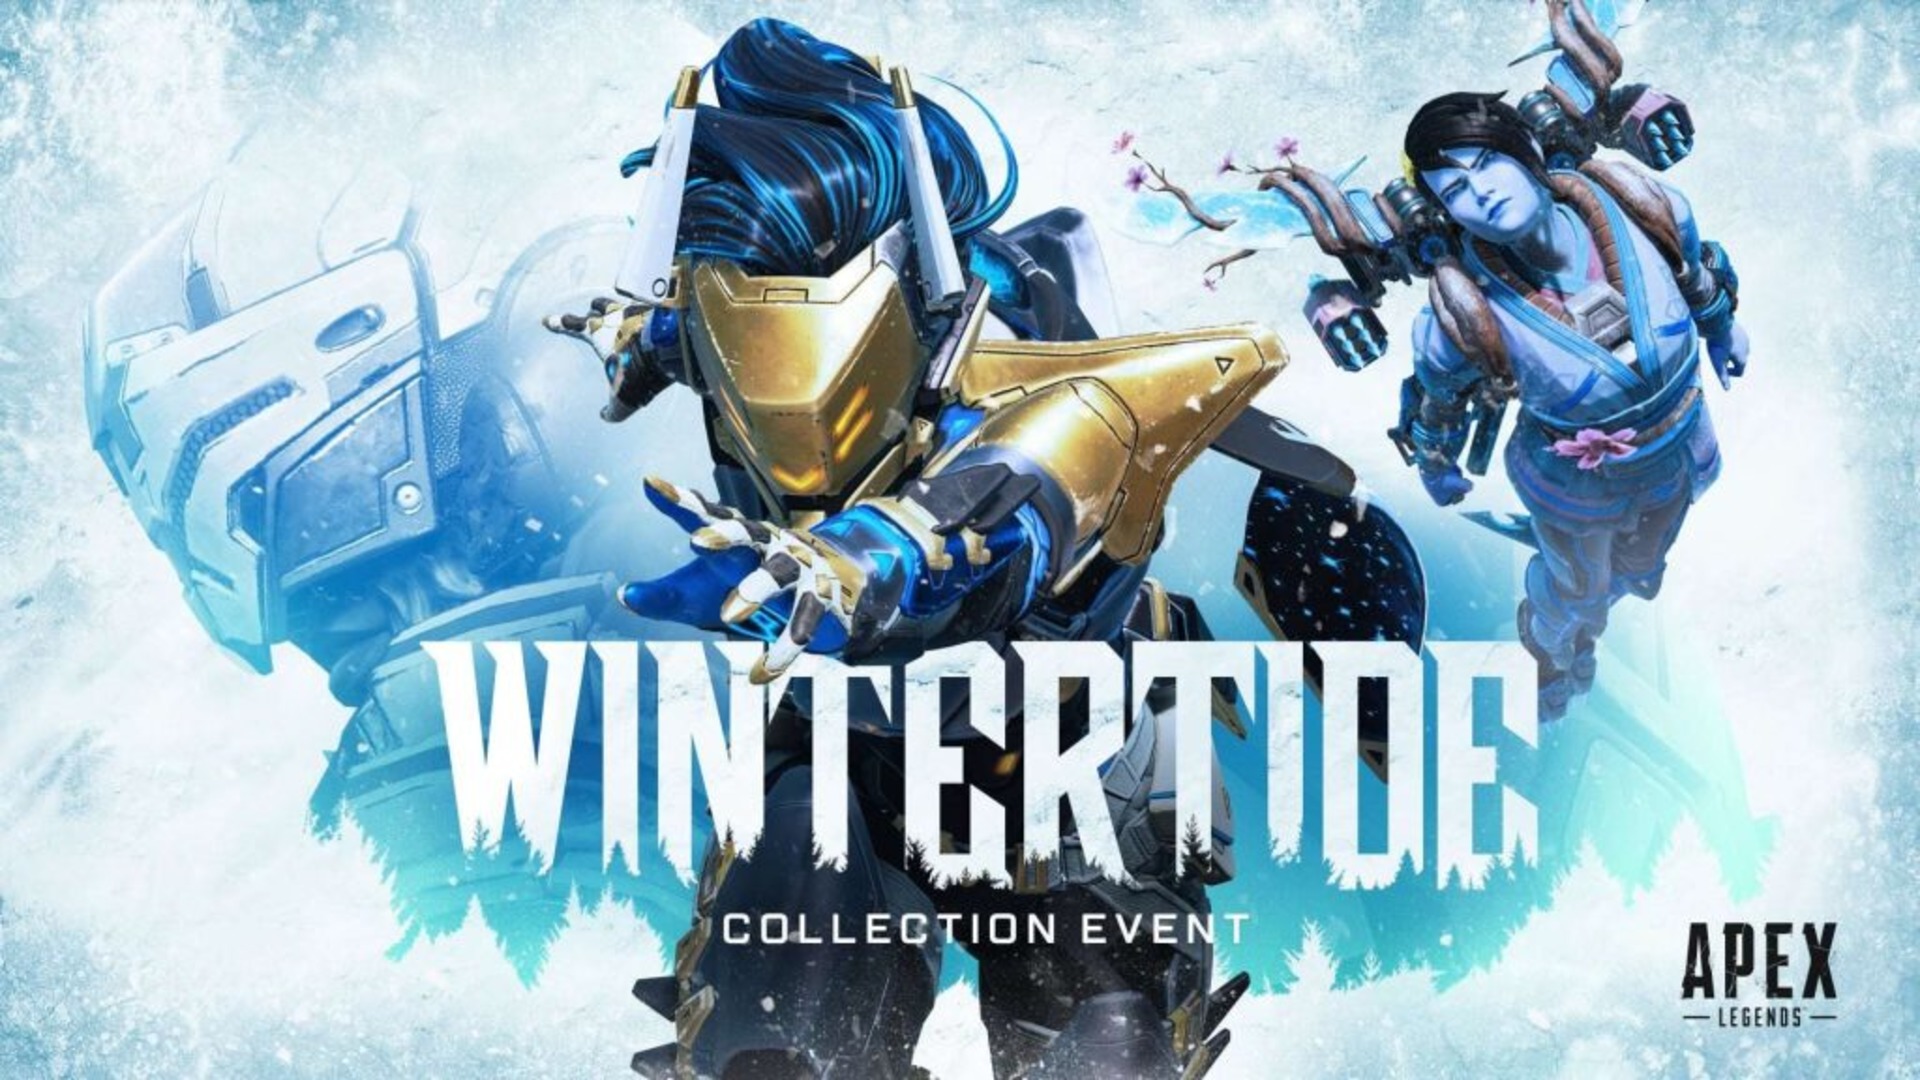 Apex Legends Wintertide Collection Event Start Date, Items, Wrath